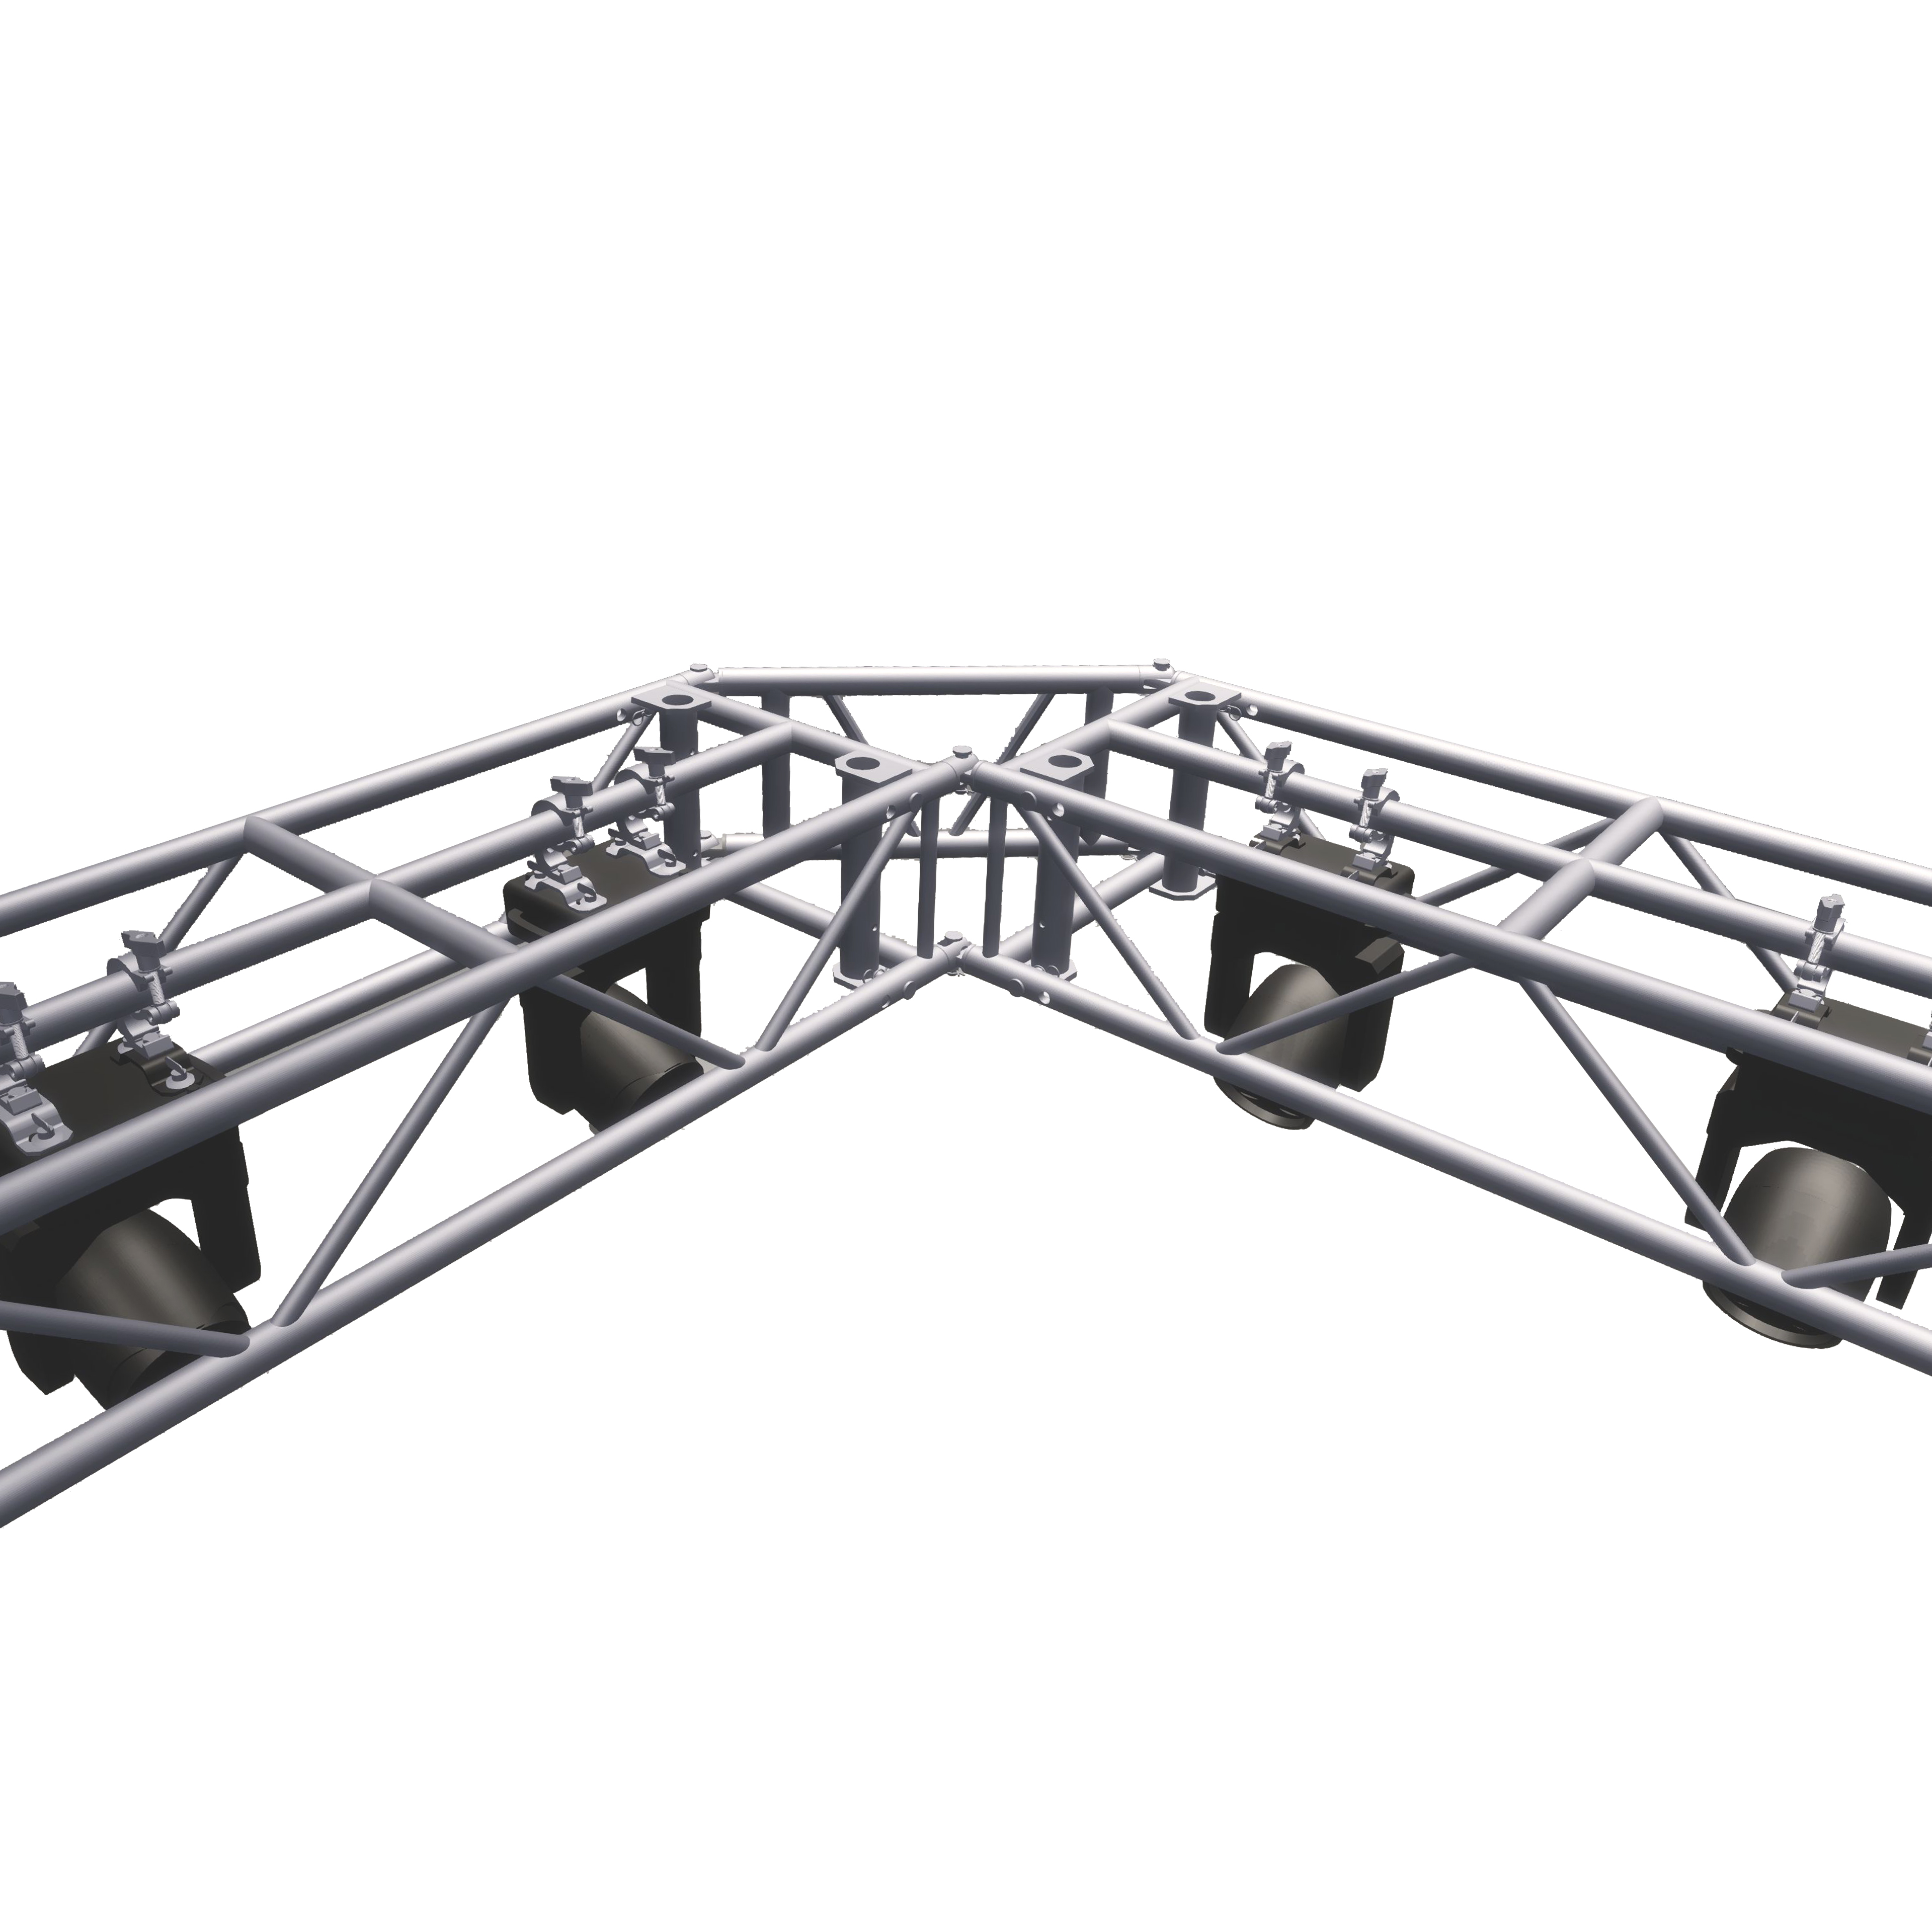  DT Pre-Rig-Truss Adapter H 90°